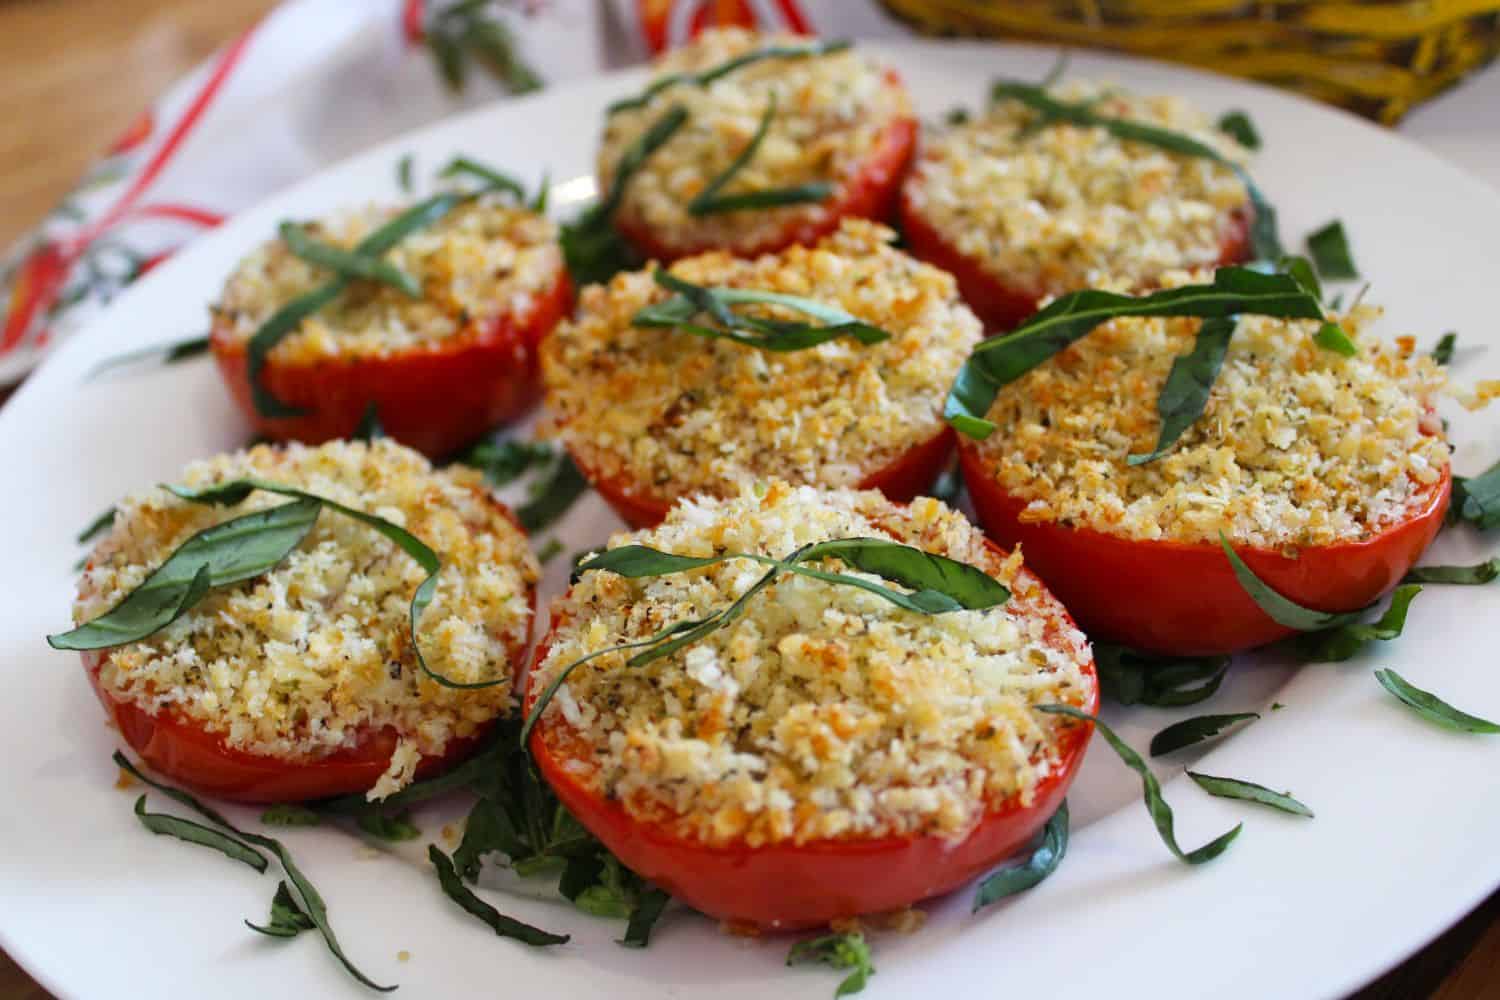 Photo of Stuffed Tomatoes with Mozzarella, Garlic and Herbs.